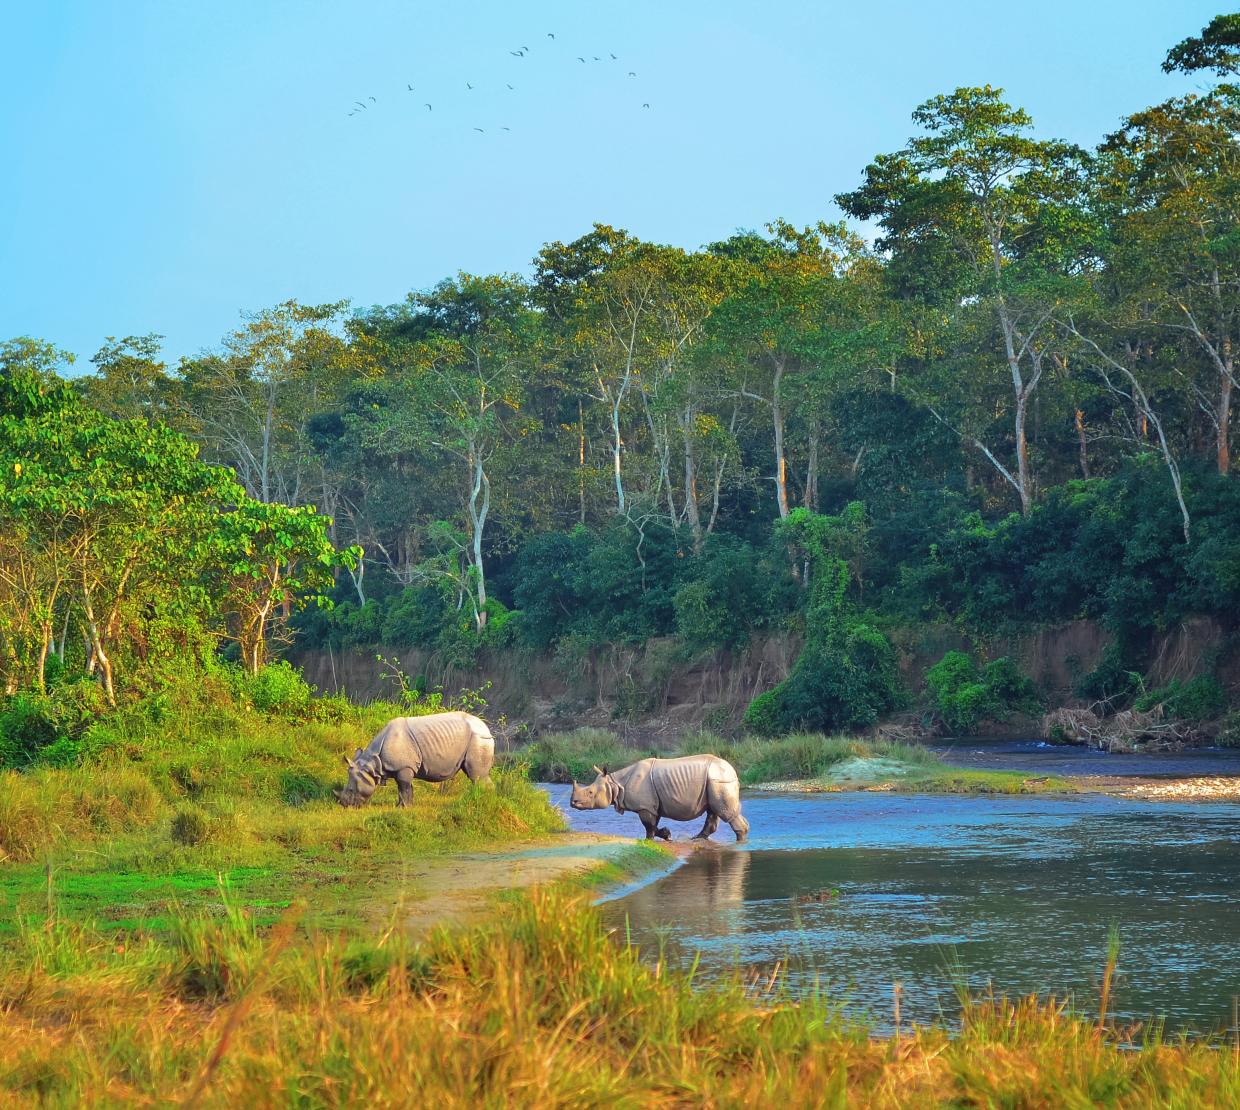 Two rhinoceroses striding out of a river. 